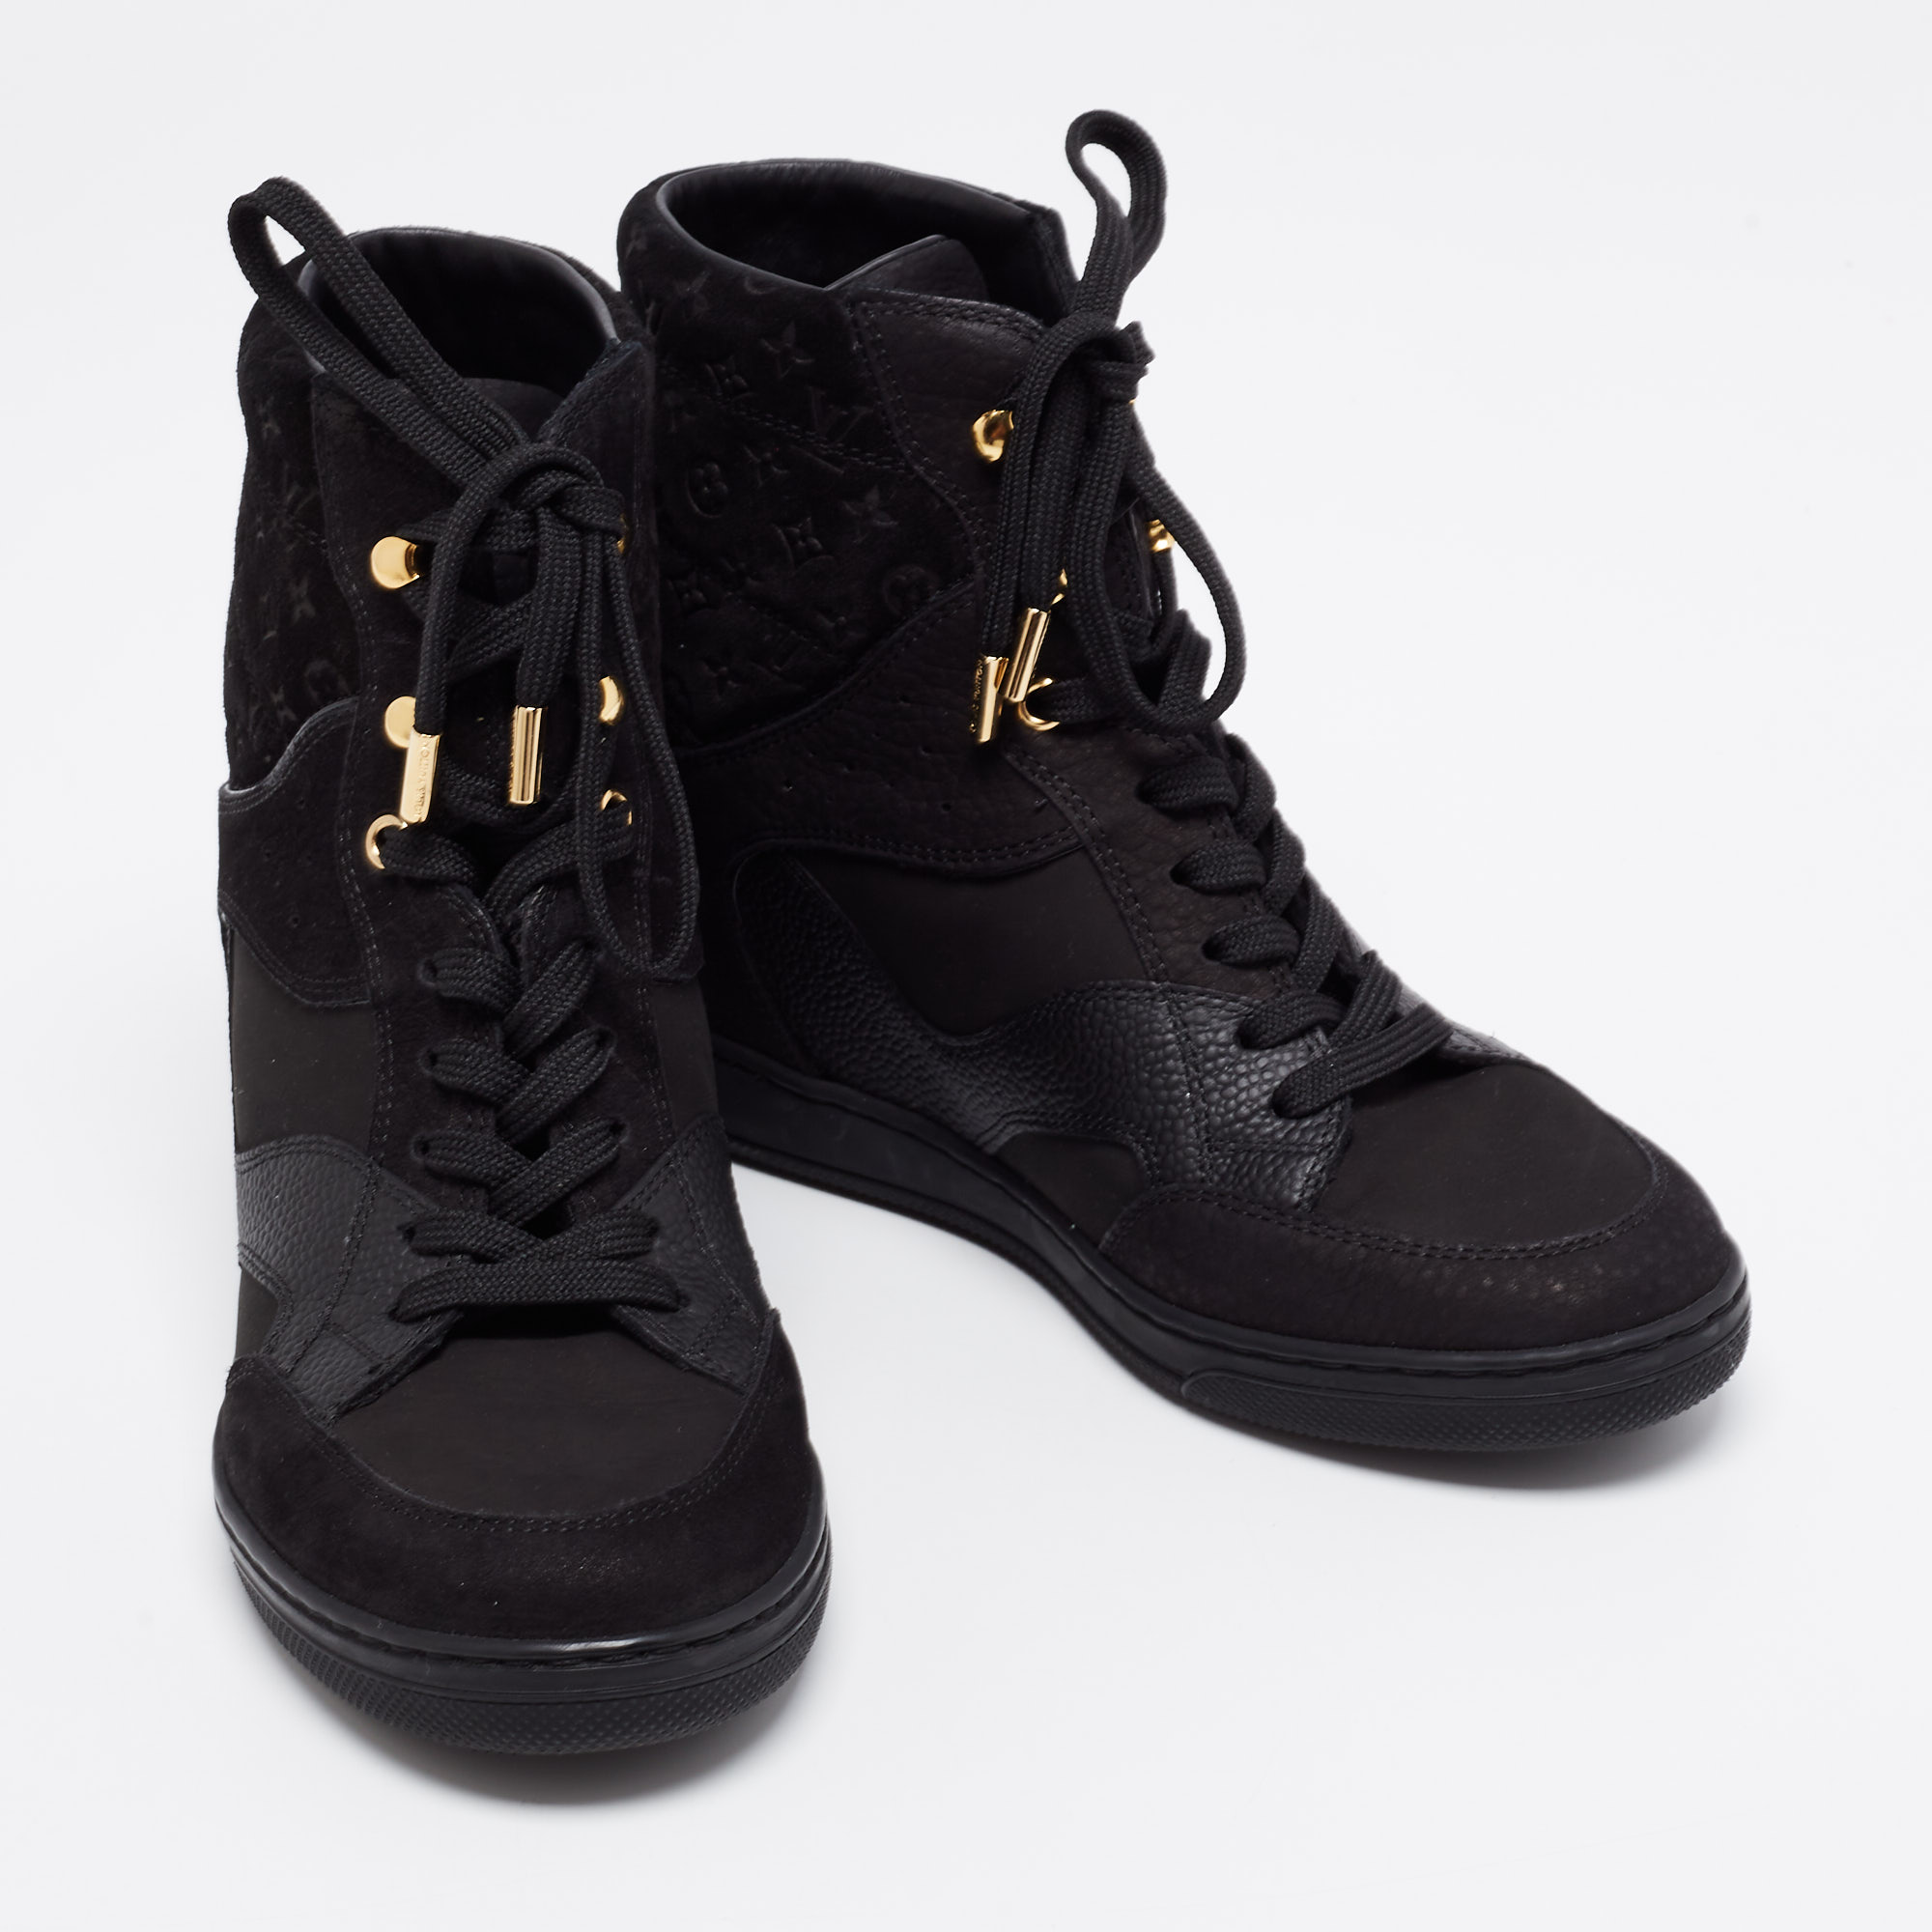 Louis Vuitton Black Monogram Empreinte Leather And Suede High Top Sneakers Size 36